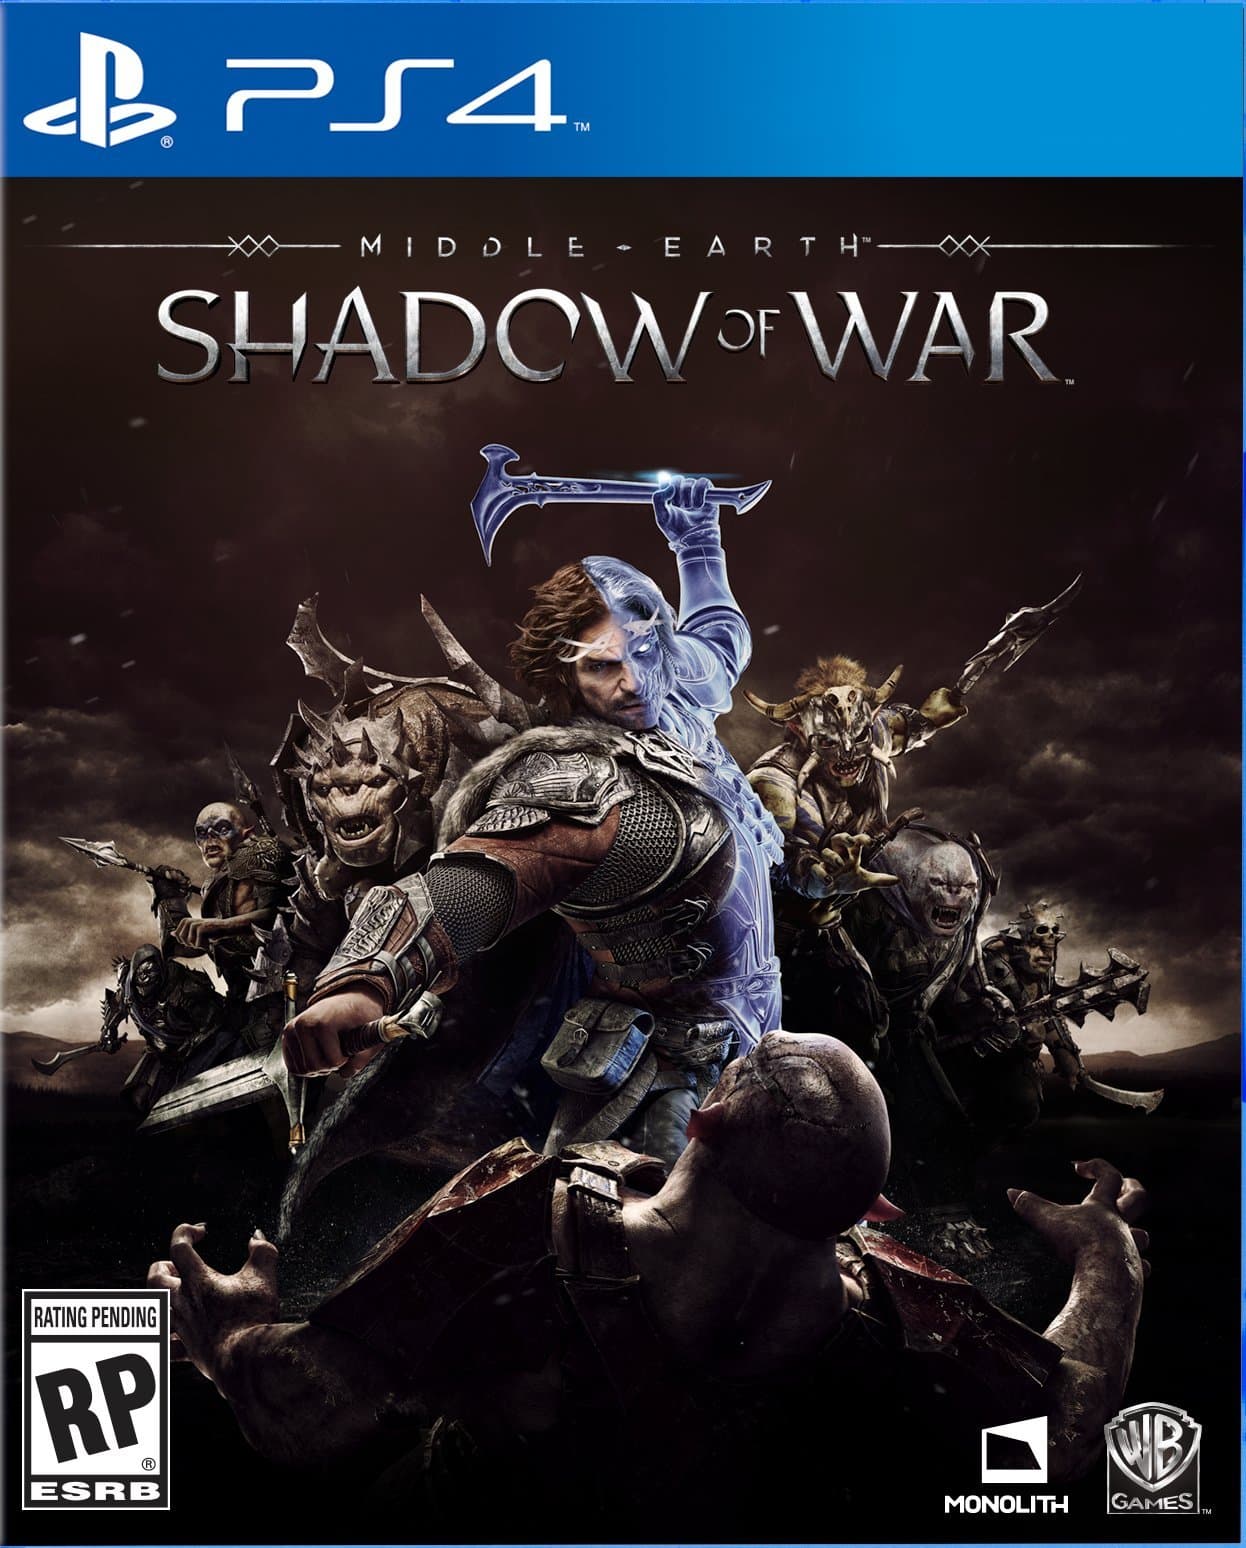 Middle-earth: Shadow of War PS4 Box Art